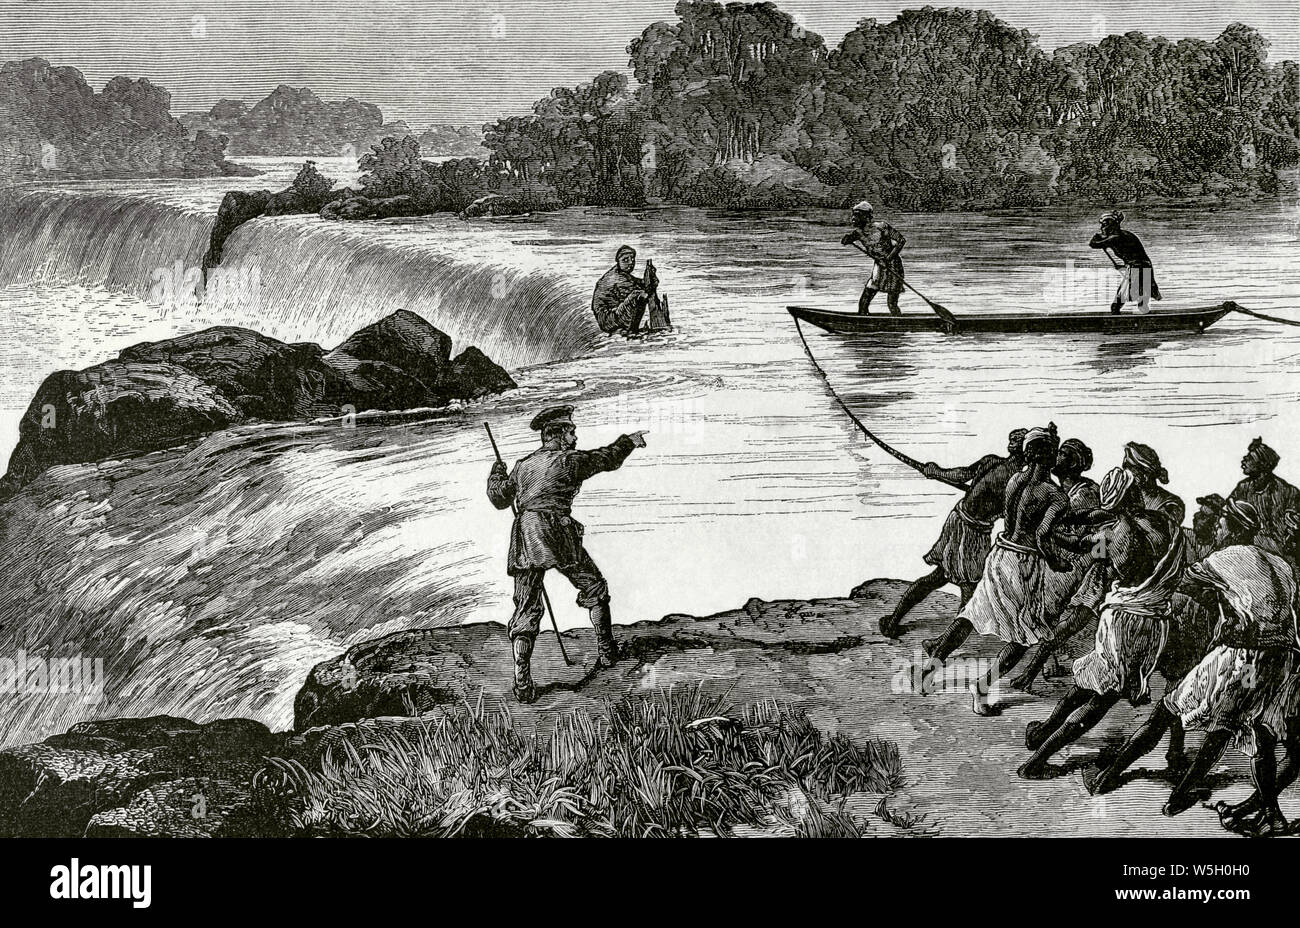 Central Africa. Desperate situation of the Zaide, who is rescued by captain Uledi, master of the canoe Lady Alice. Engraving. Africa inexplorada, el Continente Misterioso by Henry Morton Stanley, c. 1887. Stock Photo